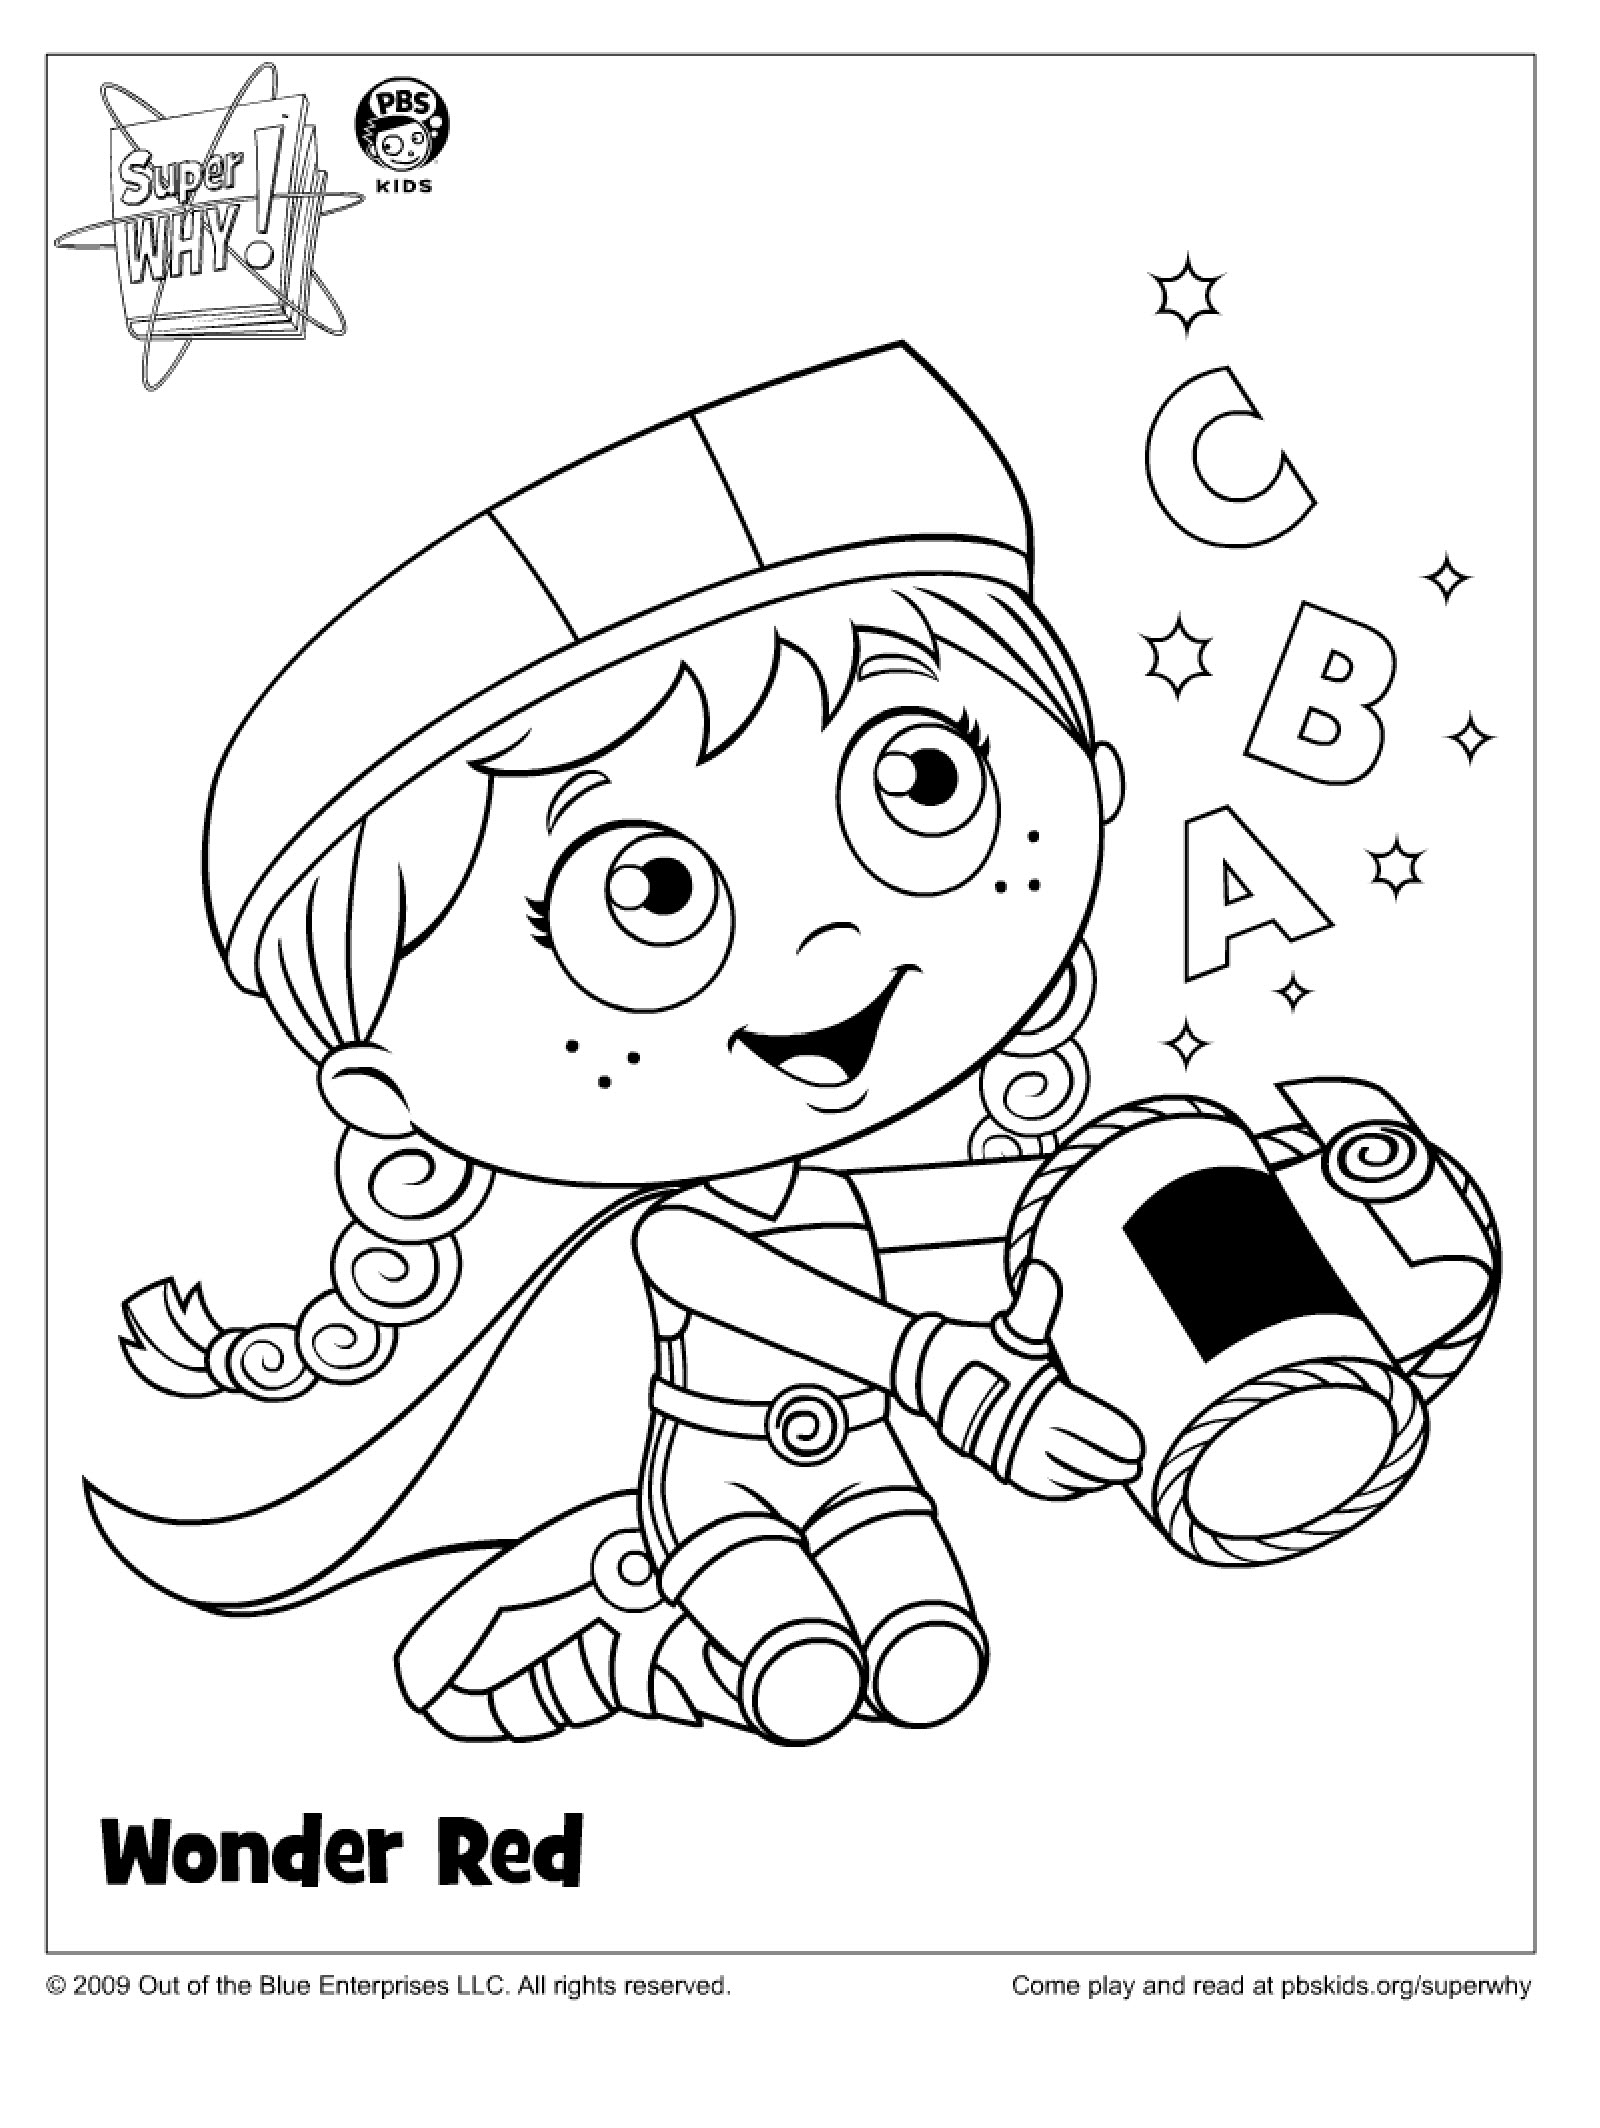 Super Why Coloring Page - Coloring